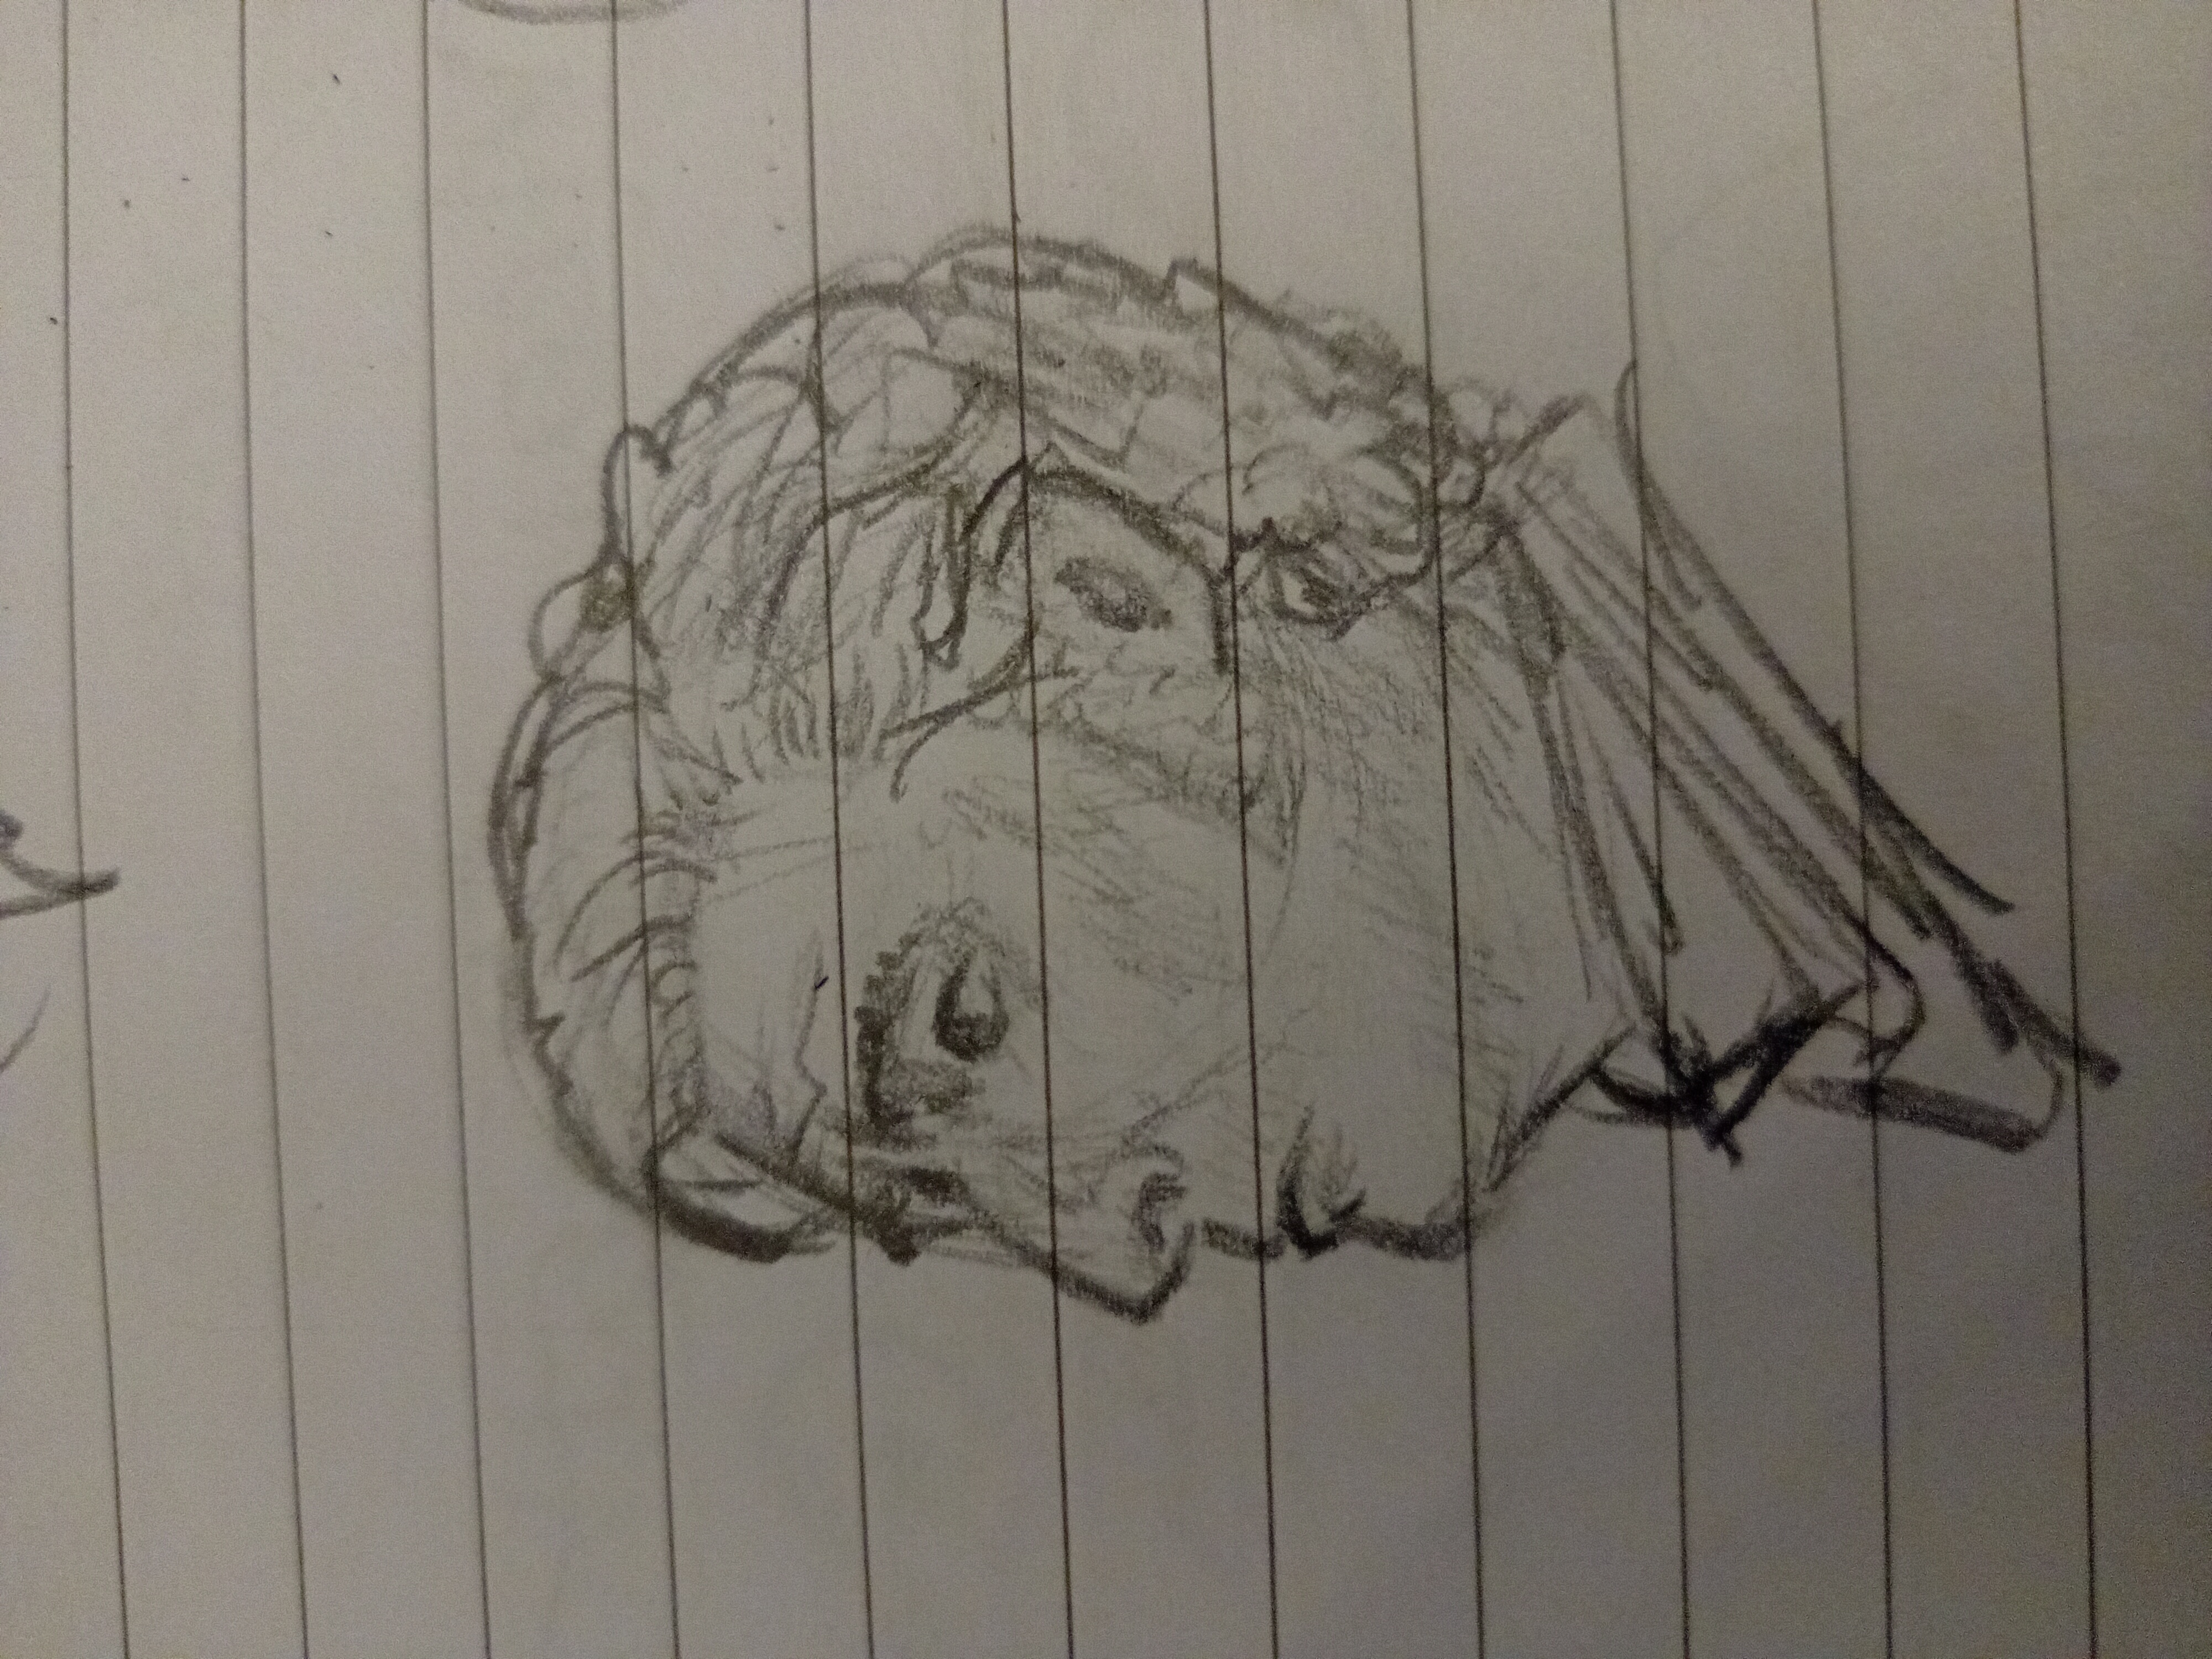 A side profile of Rhys Darby as Stede Bonnet. The drawing is done in pencil on lined paper, and ends at the neck. He has a slightly worried expression and is looking to the left.